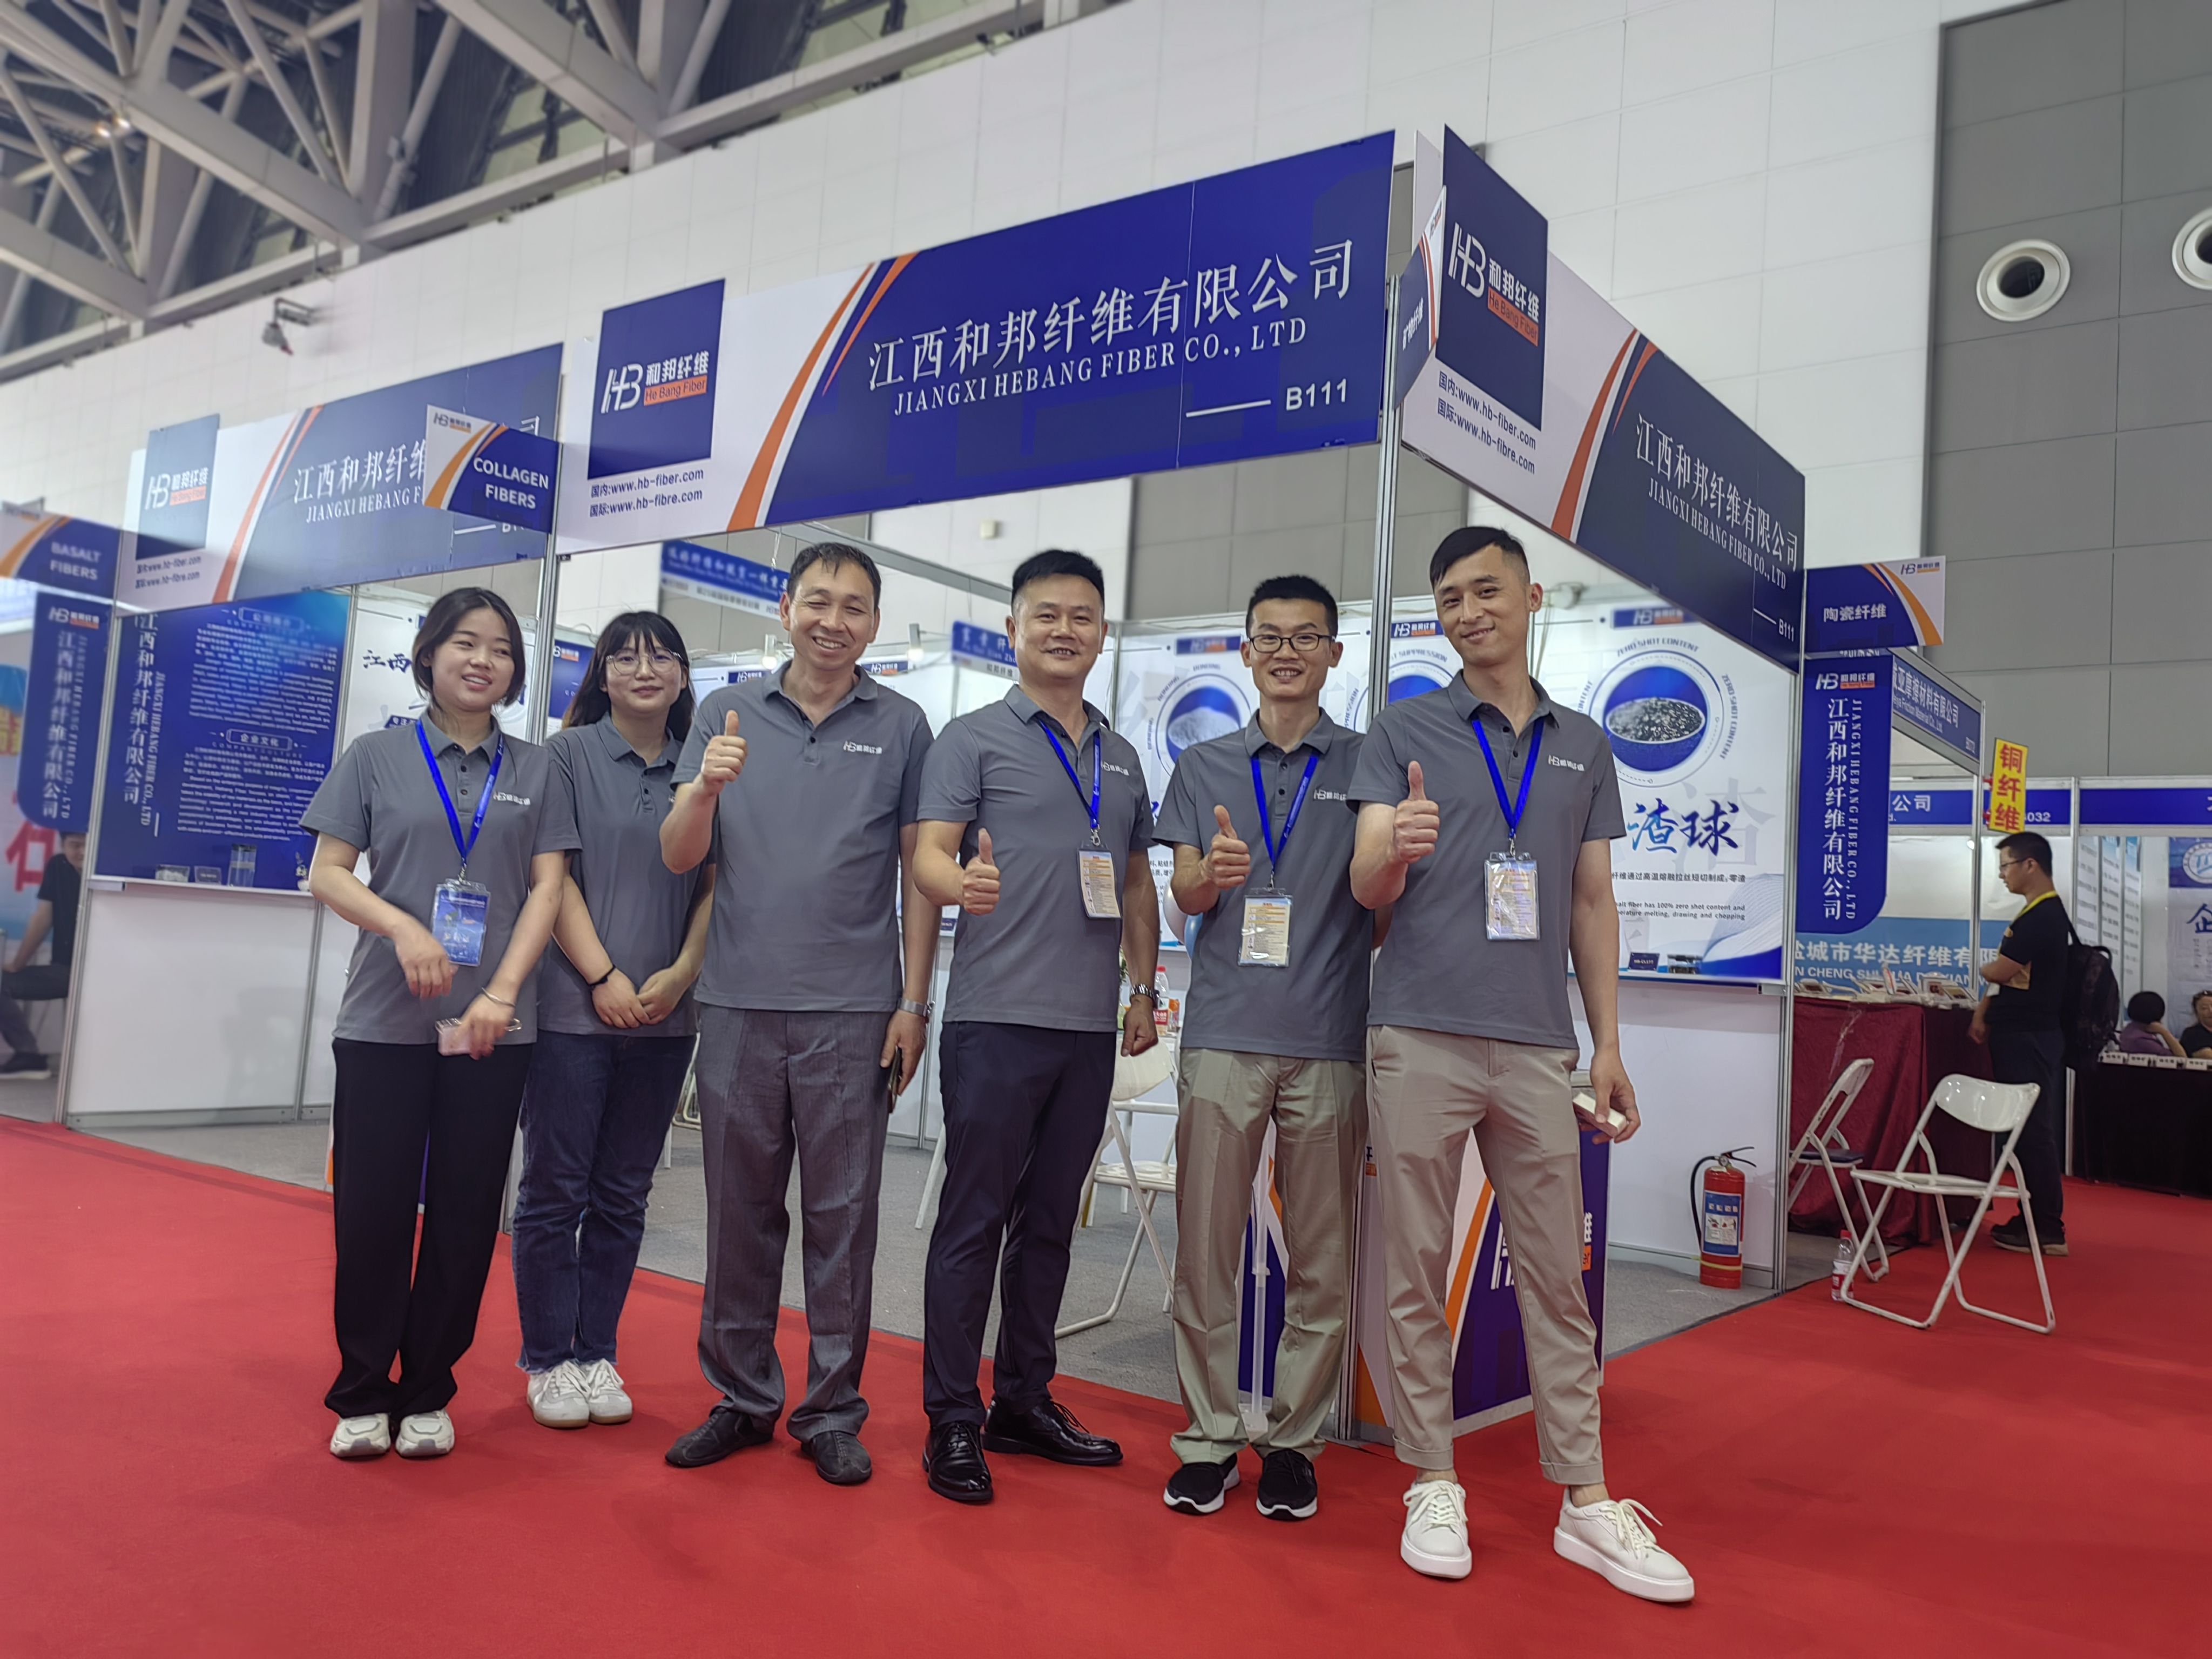 The 25th China International Friction&Sealing Materials Technology Exchange&Product Exhibition